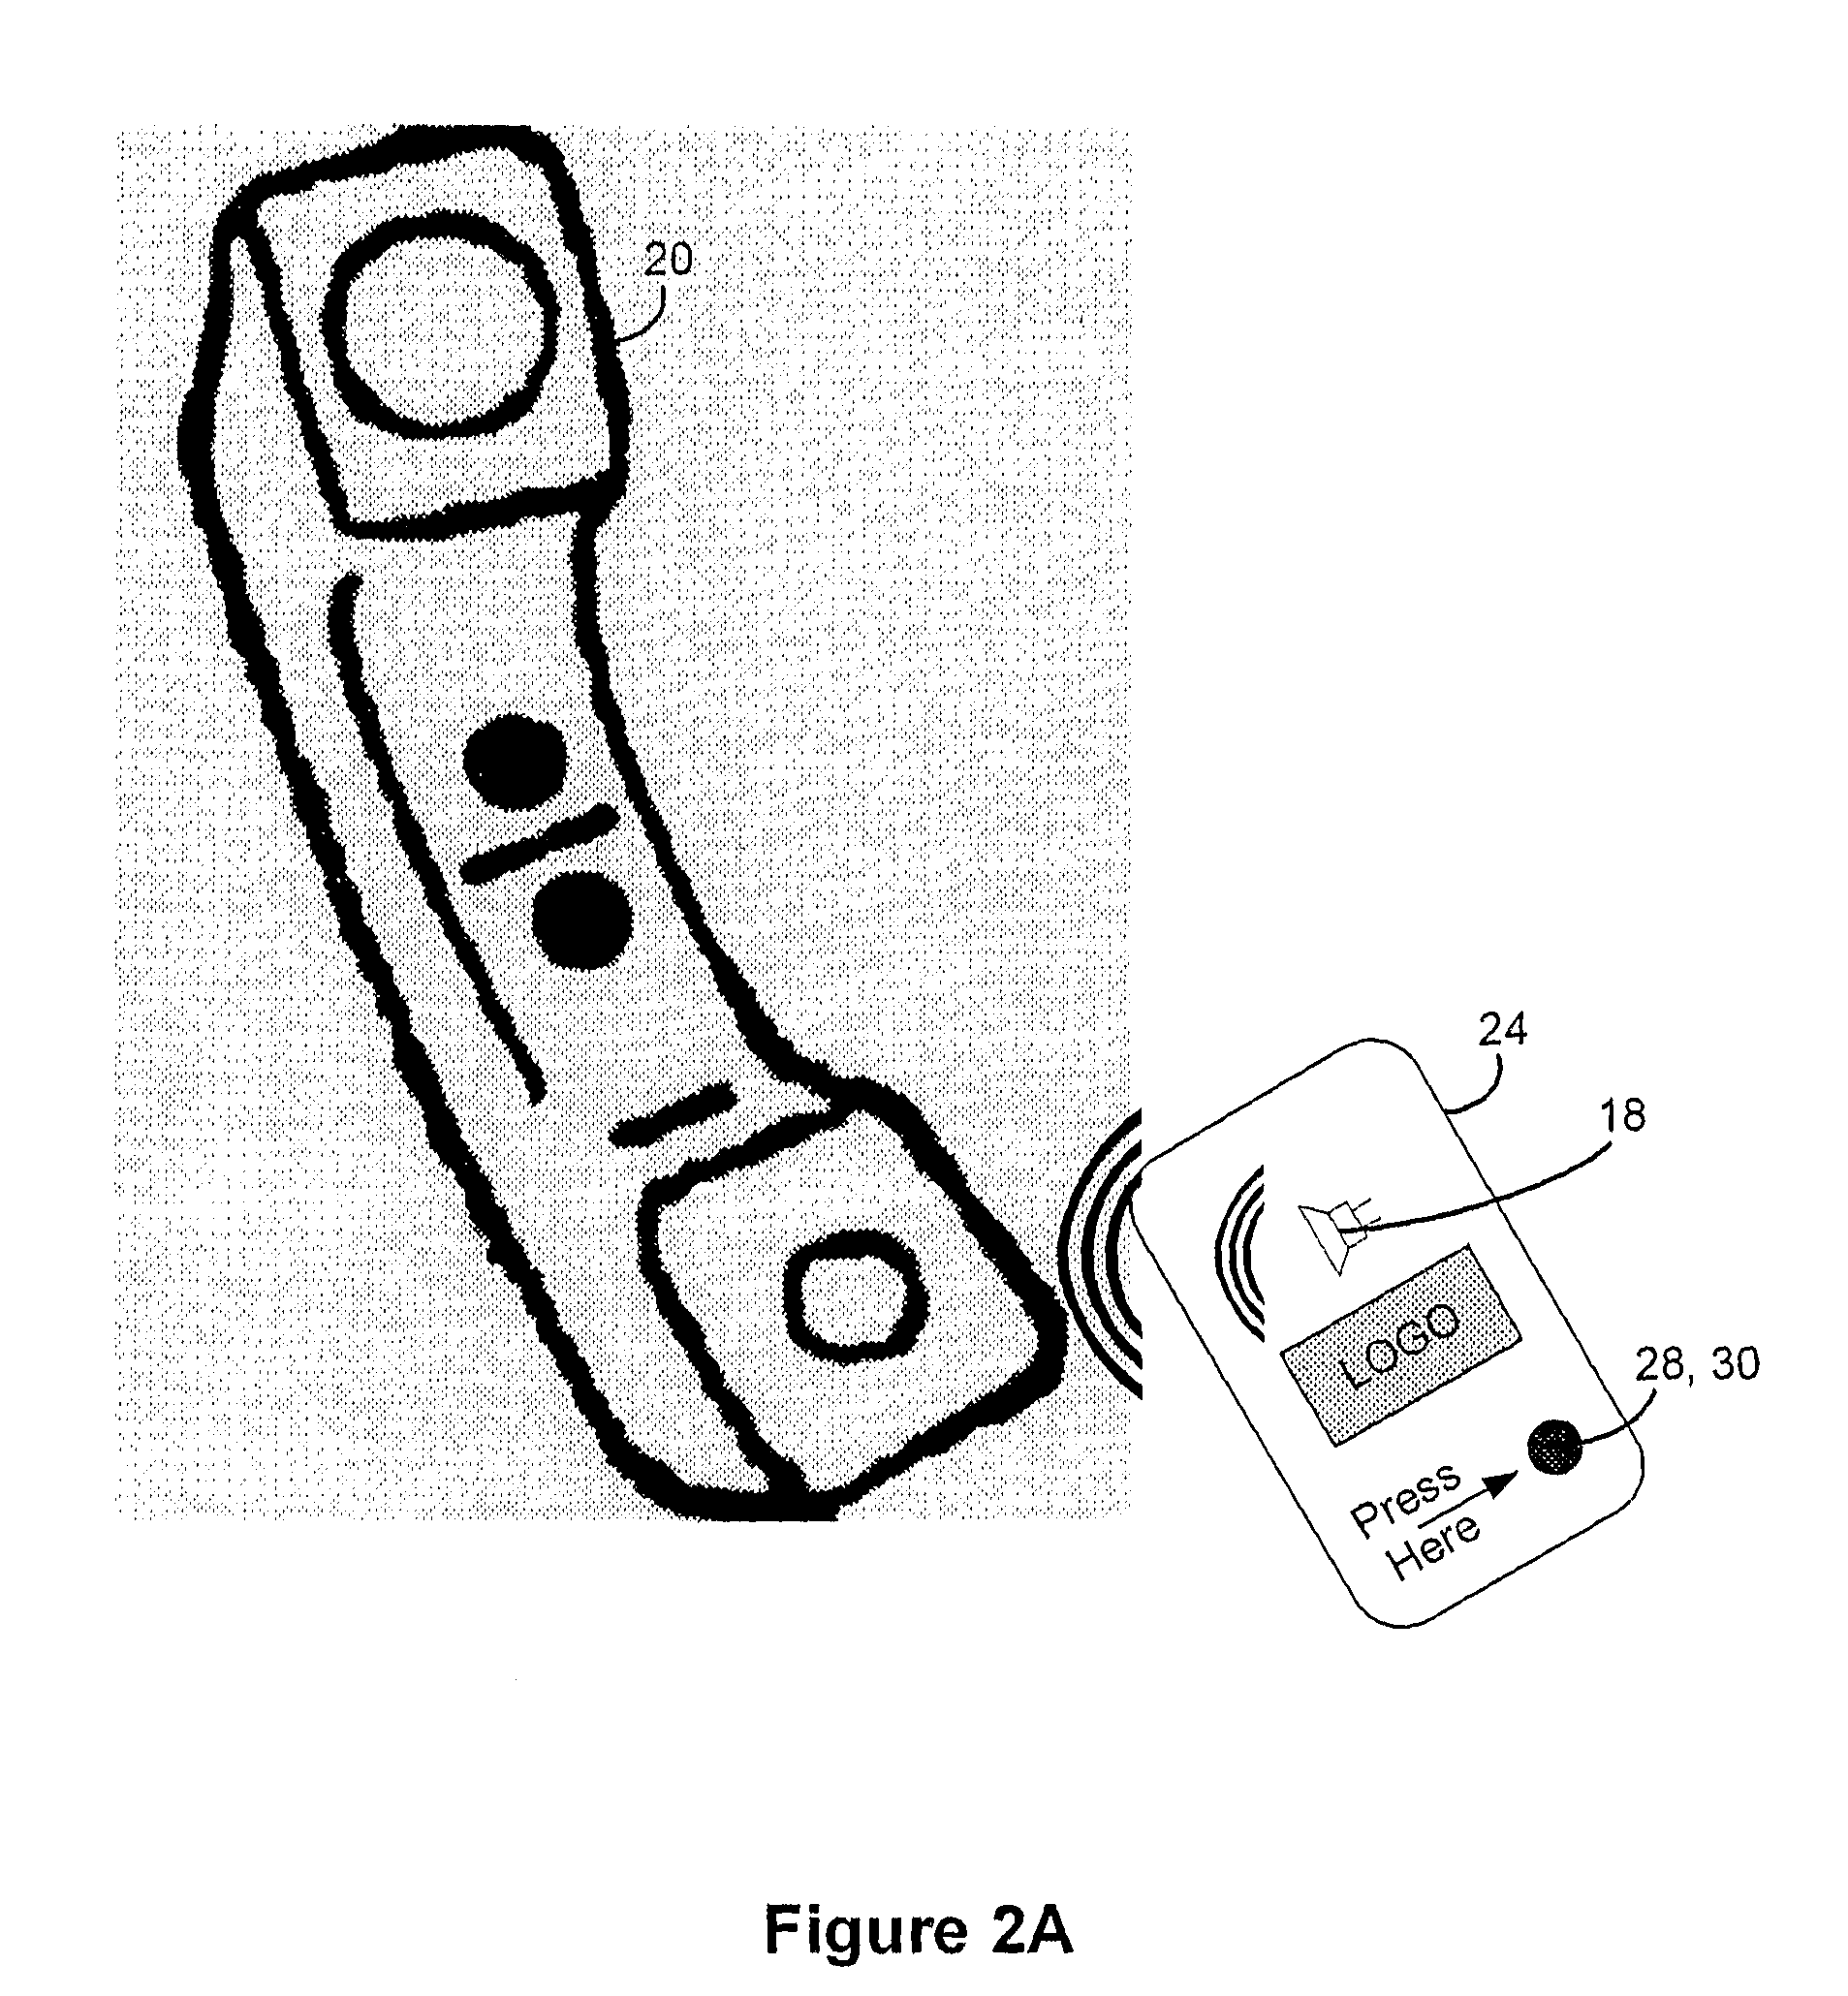 Portable dialer device and method